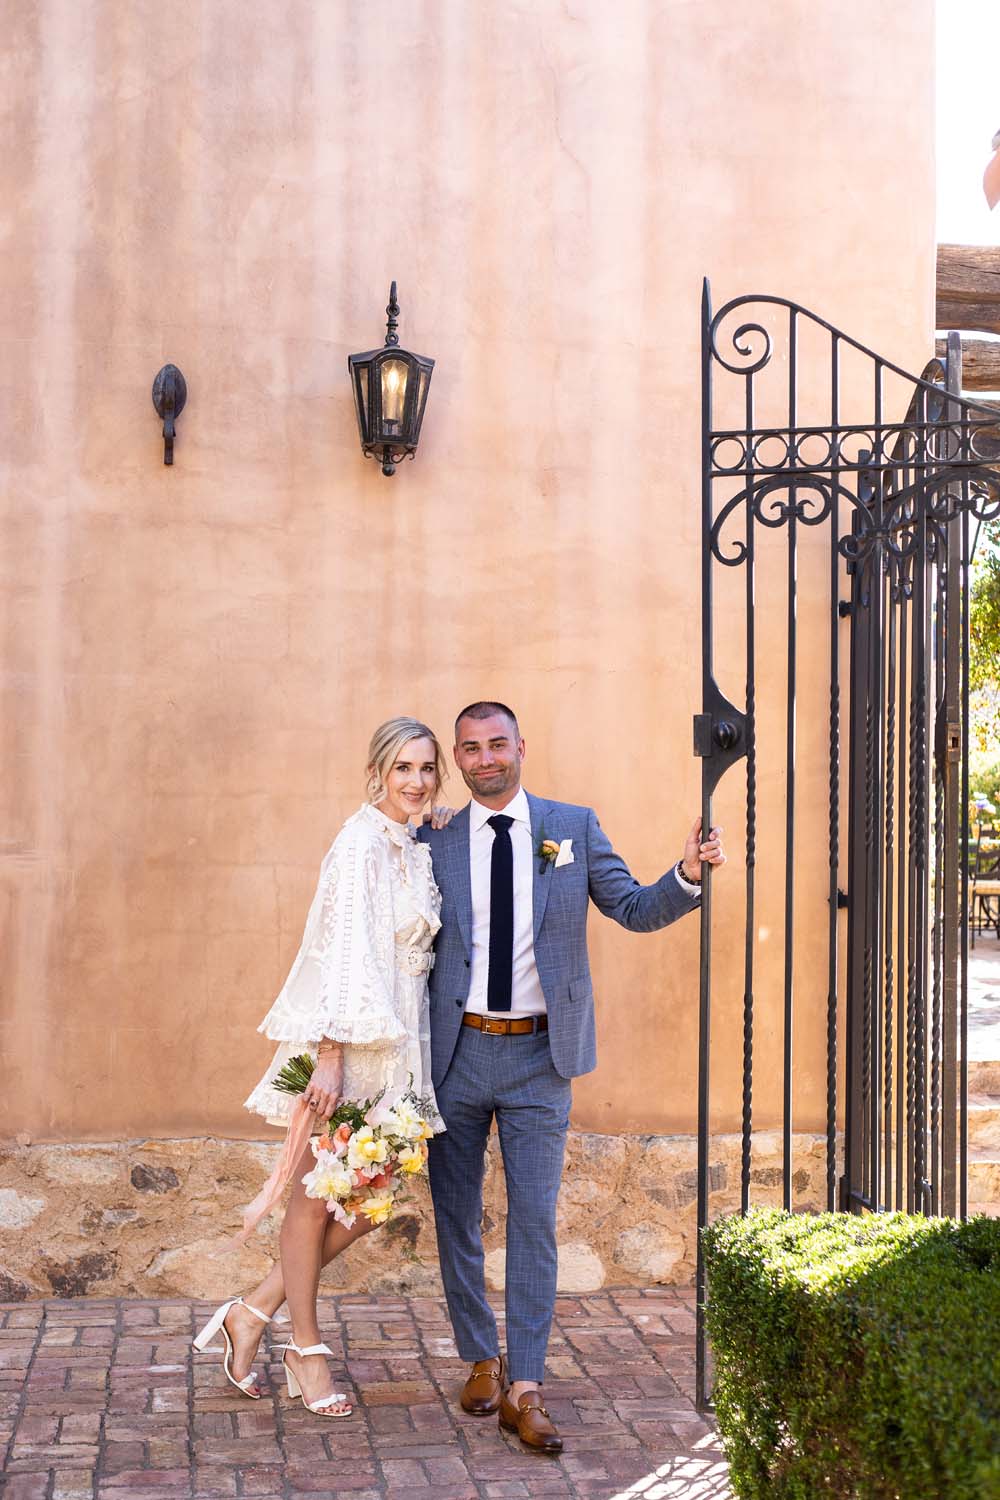 Intimate Mediterranean-inspired micro wedding in Scottsdale, planned with MatchBook